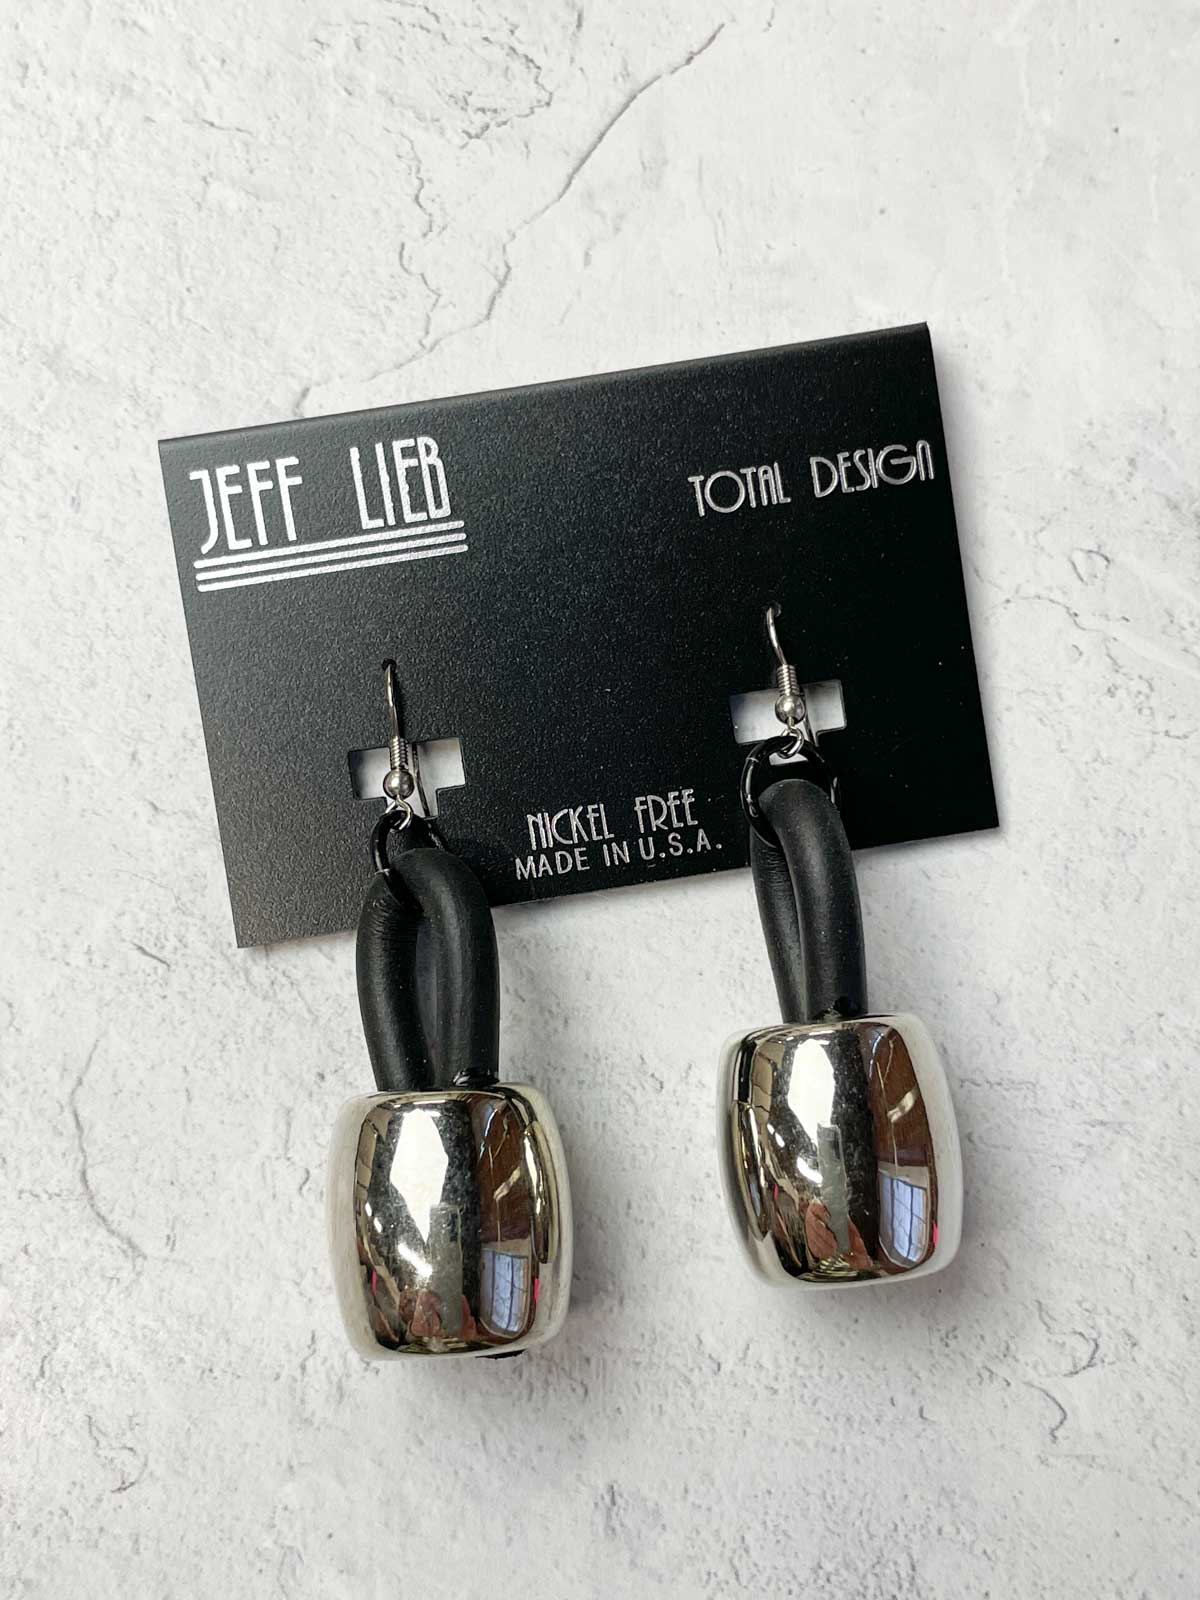 Jeff Lieb Total Design Jewelry Chunky Bead Drop Earrings, Silver - Statement Boutique